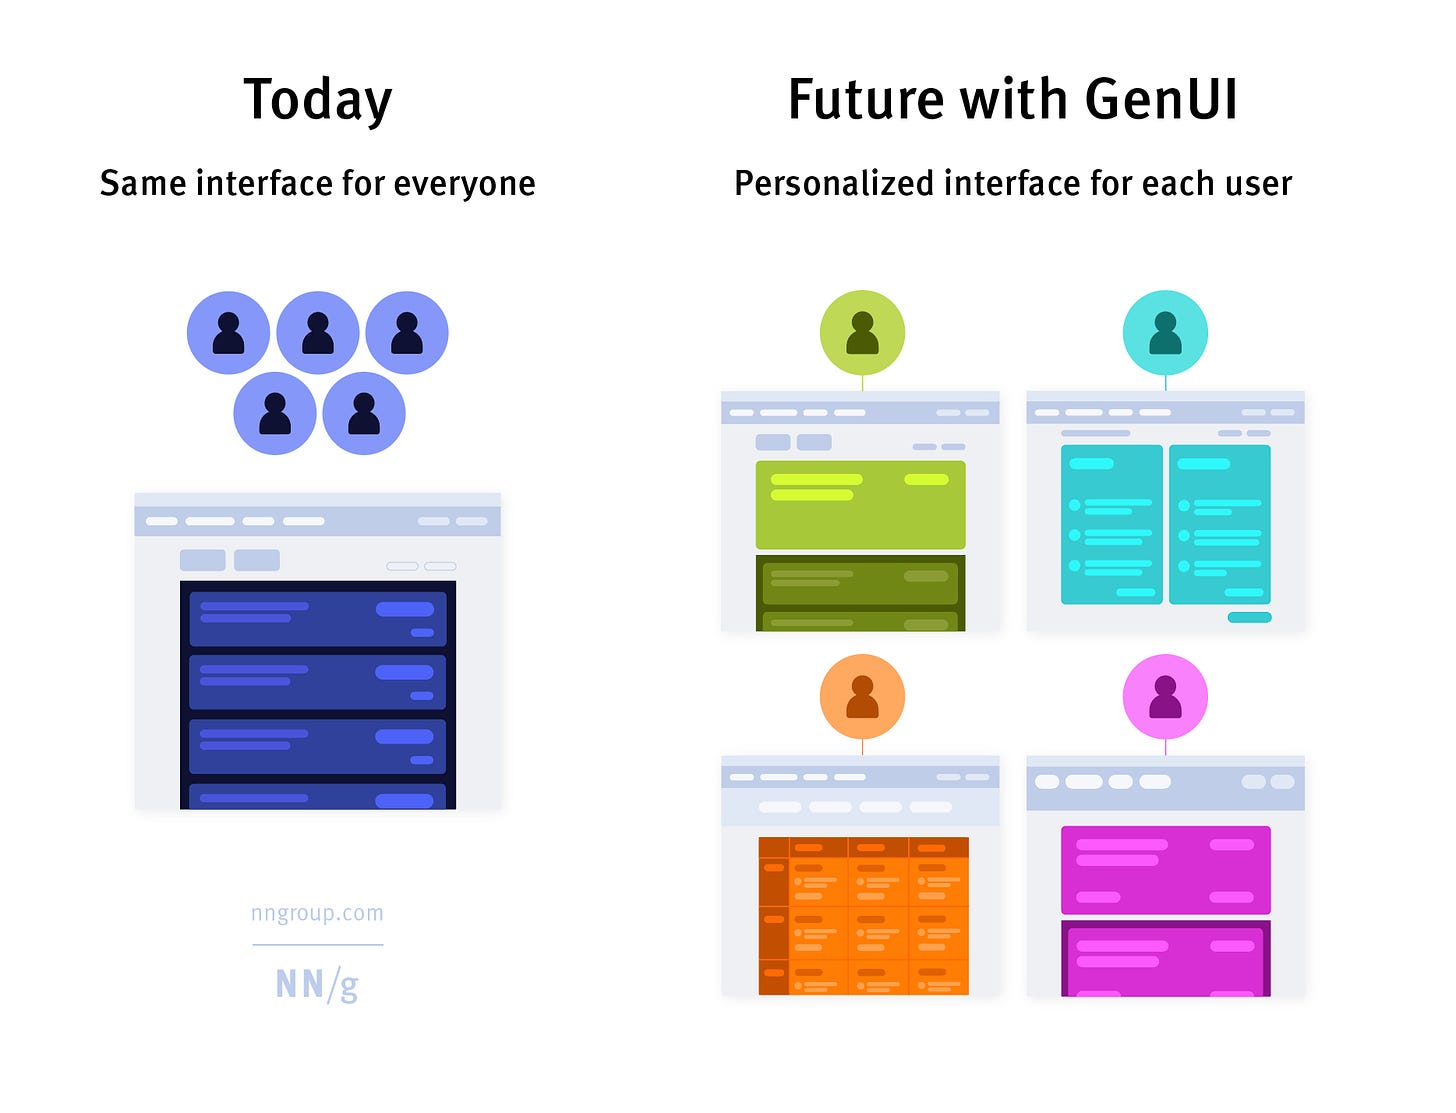 Today = the same interface for everyone. Future with GenUI = Personalized interface for each user